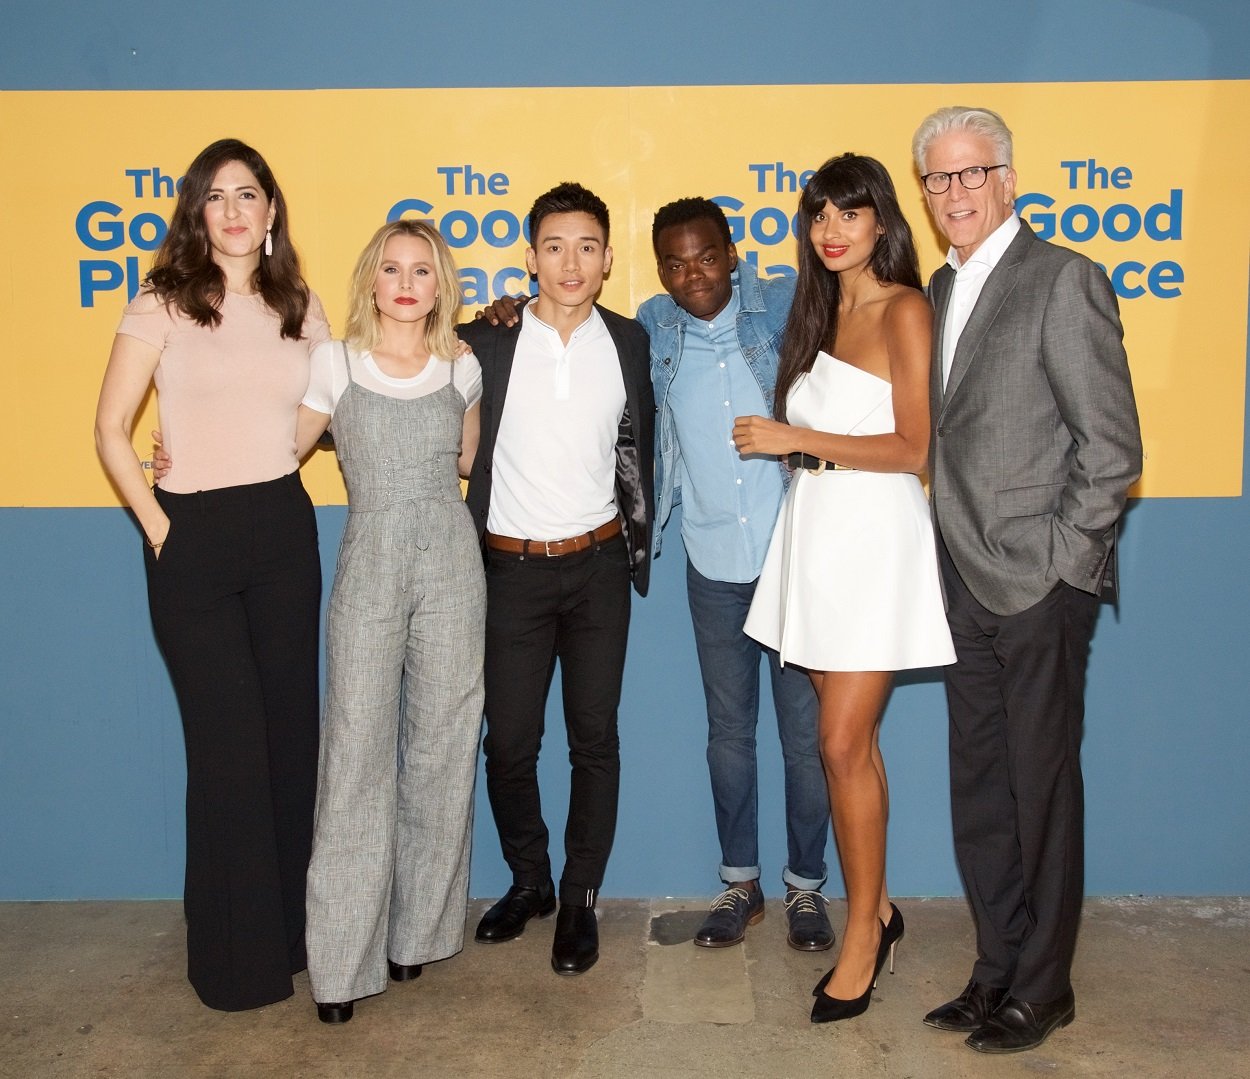 The Good Place cast: D'Arcy Carden, Kristen Bell, Manny Jacinto, William Jackson Harper, Jameela Jamil, and Ted Danson